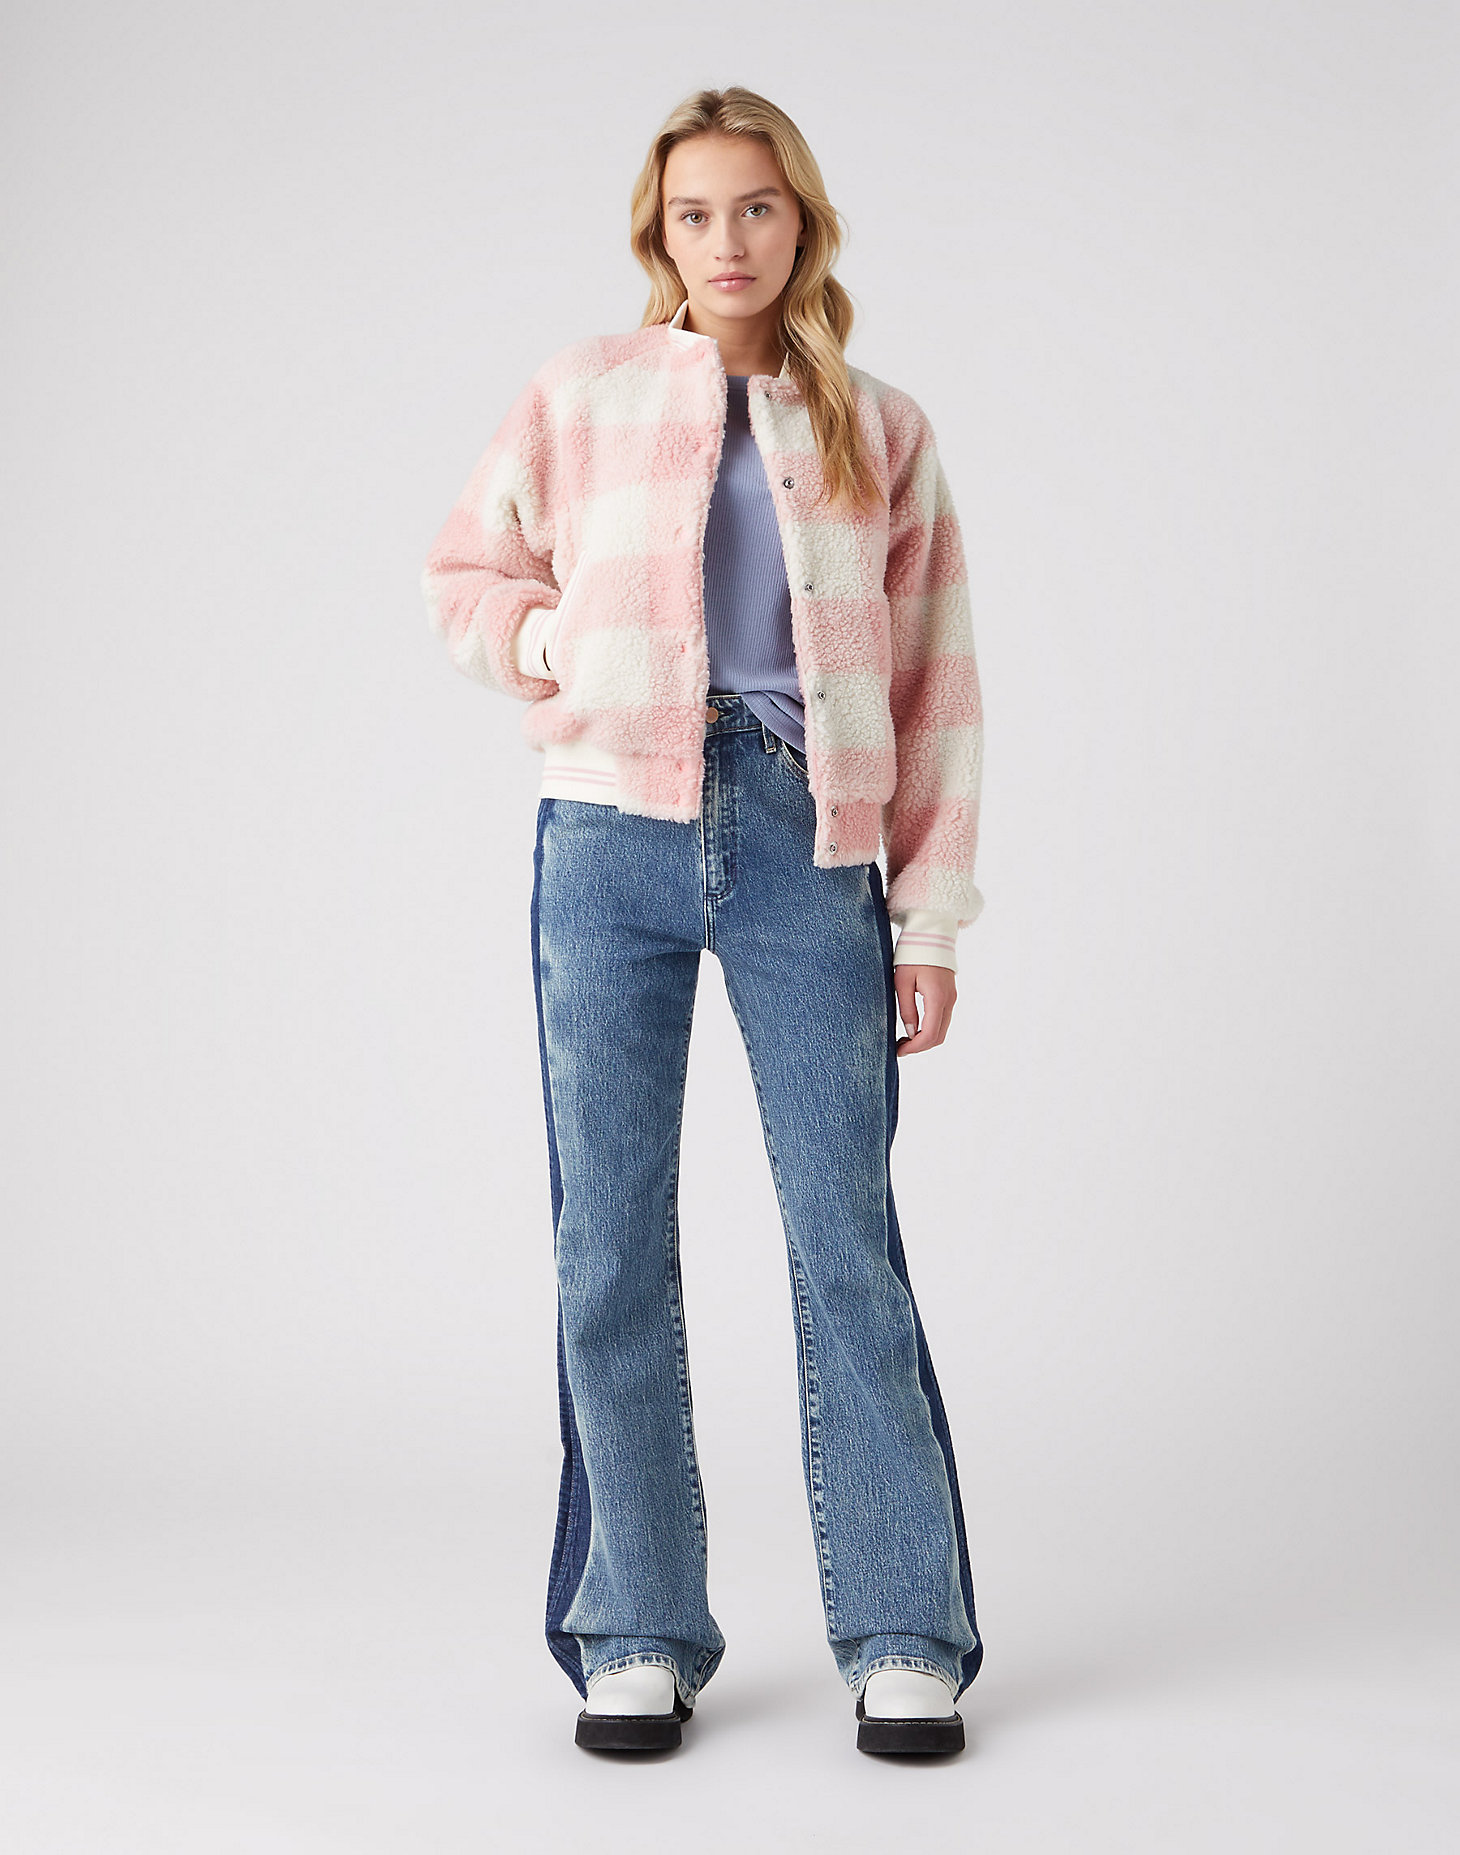 Sherpa Bomber in Silver Pink alternative view 1